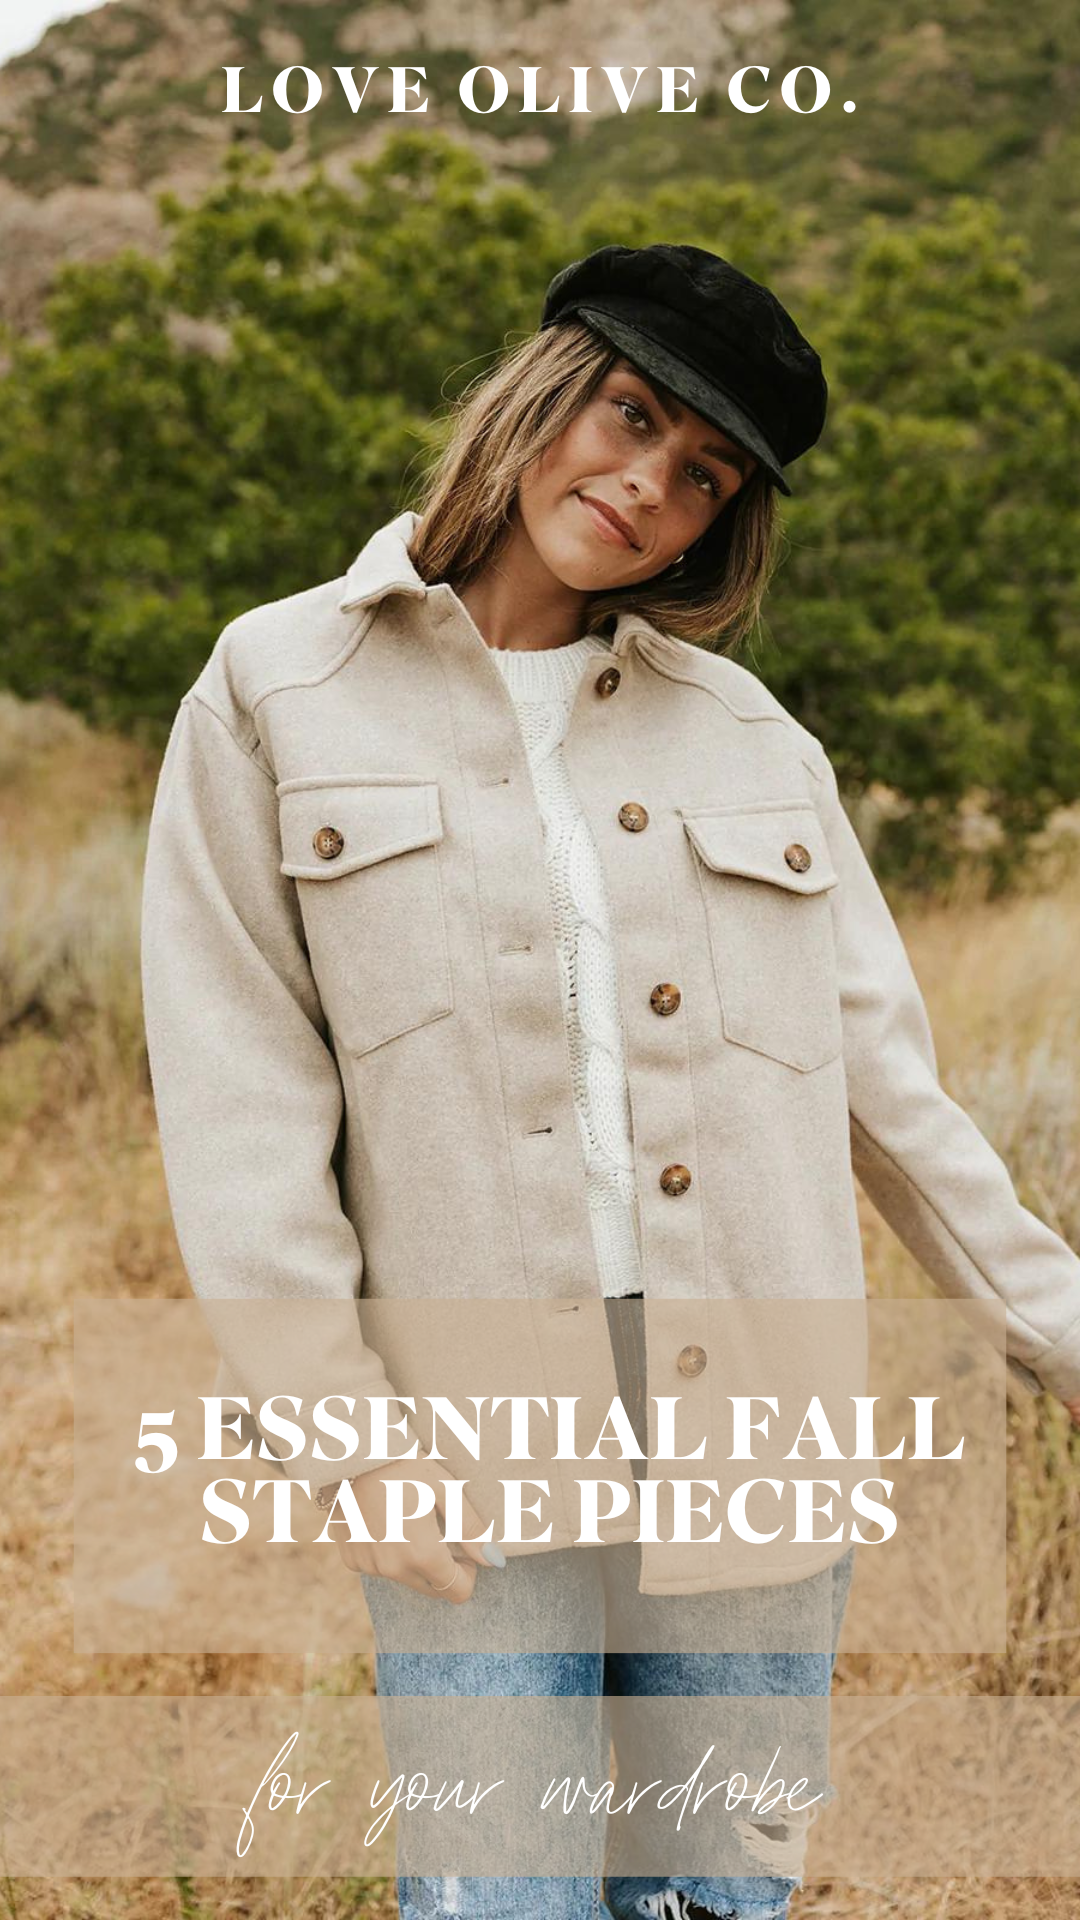 5 essential fall staple pieces for your wardrobe. www.loveoliveco.com